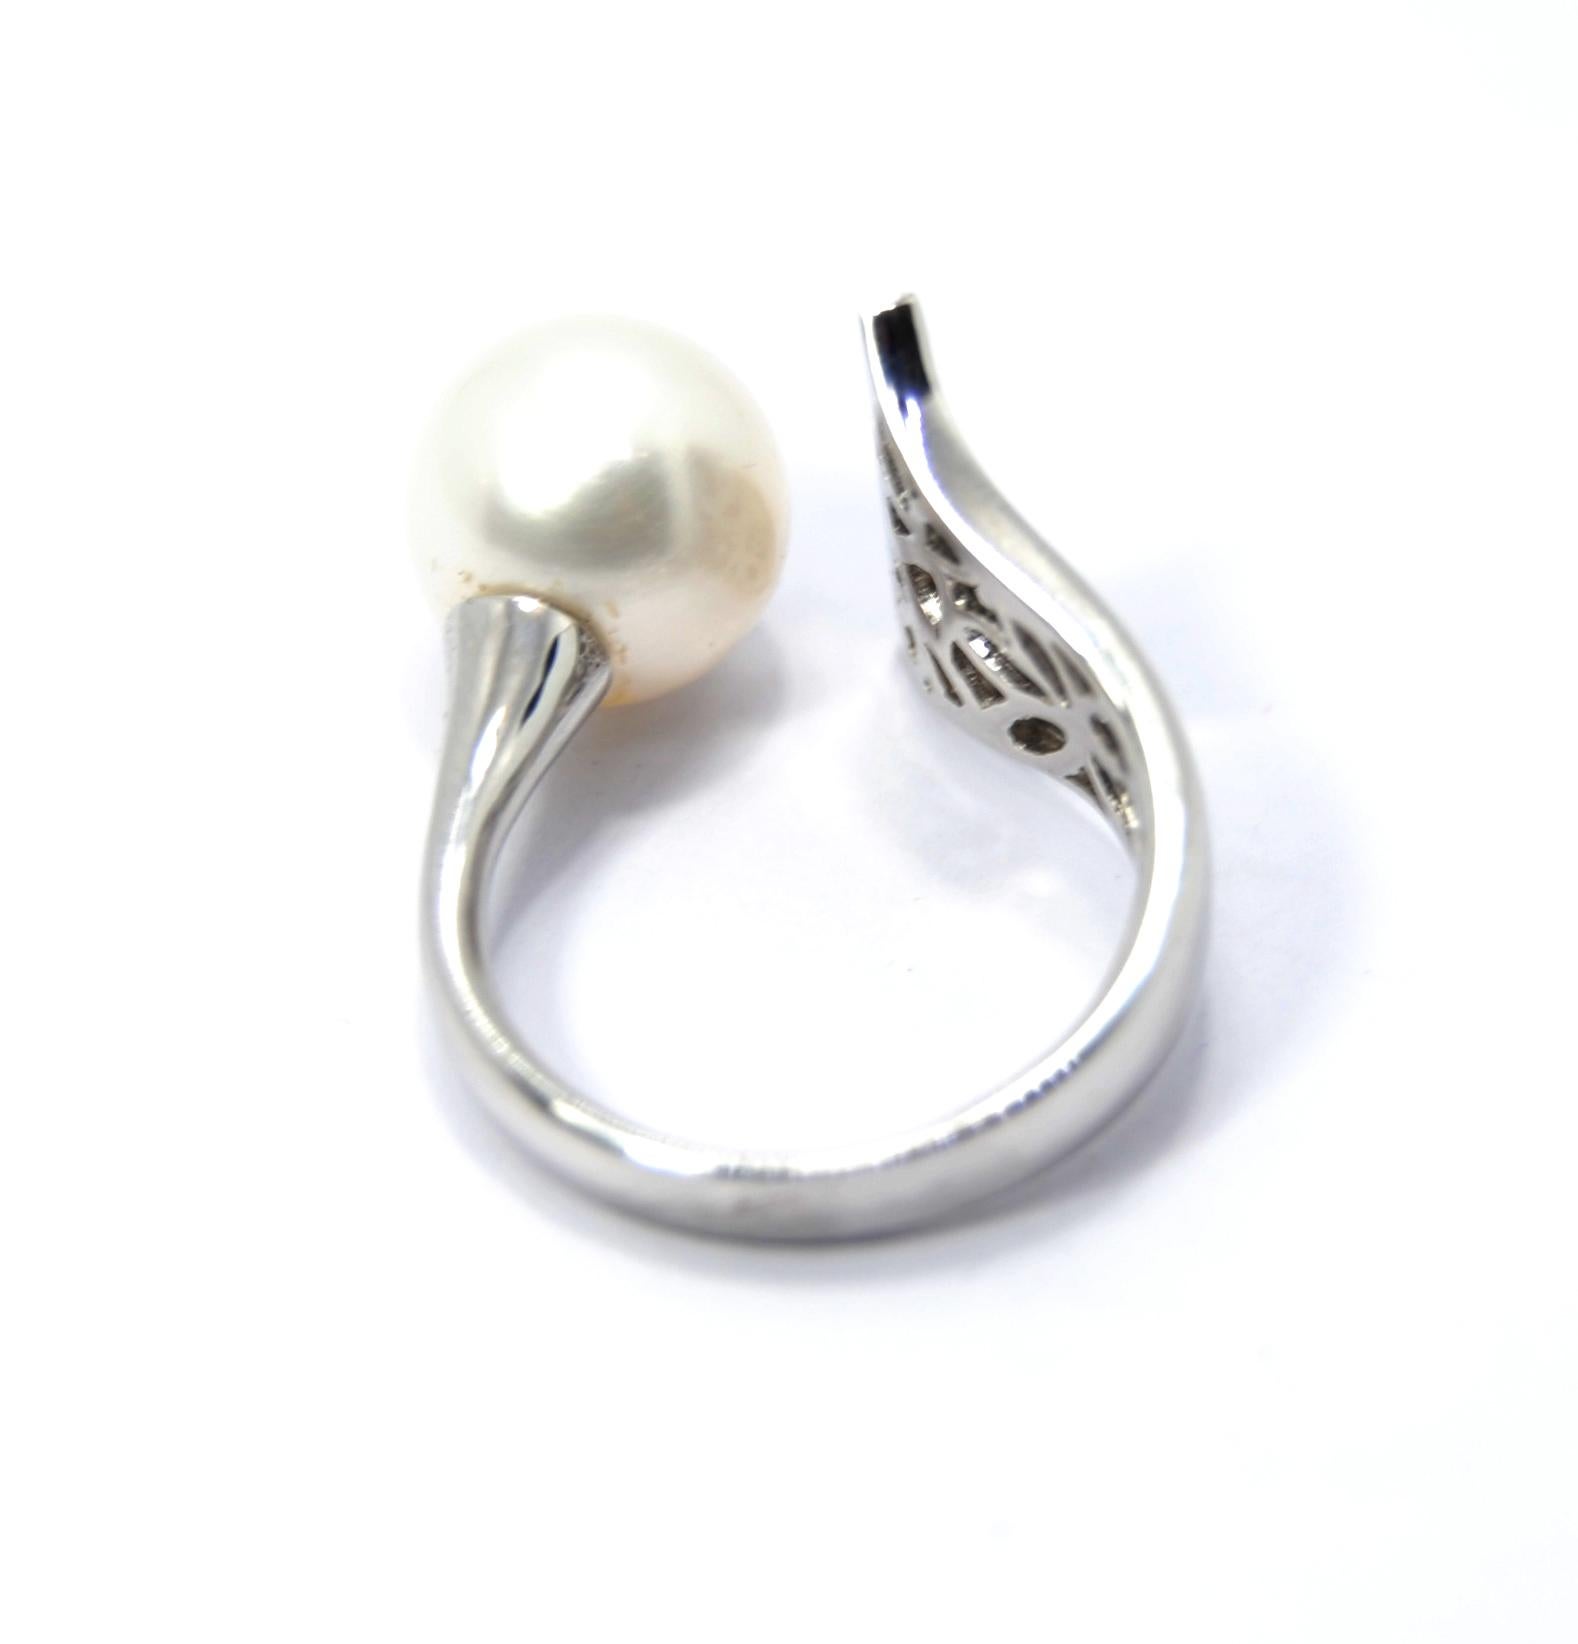 Irama Pradera is a Young designer from Spain that searches always for the best gems and combines classic with contemporary mounting and styles. 
Sleekly crafted in 18K white gold these romantic and classic cultivated white pearl  ring consist on a